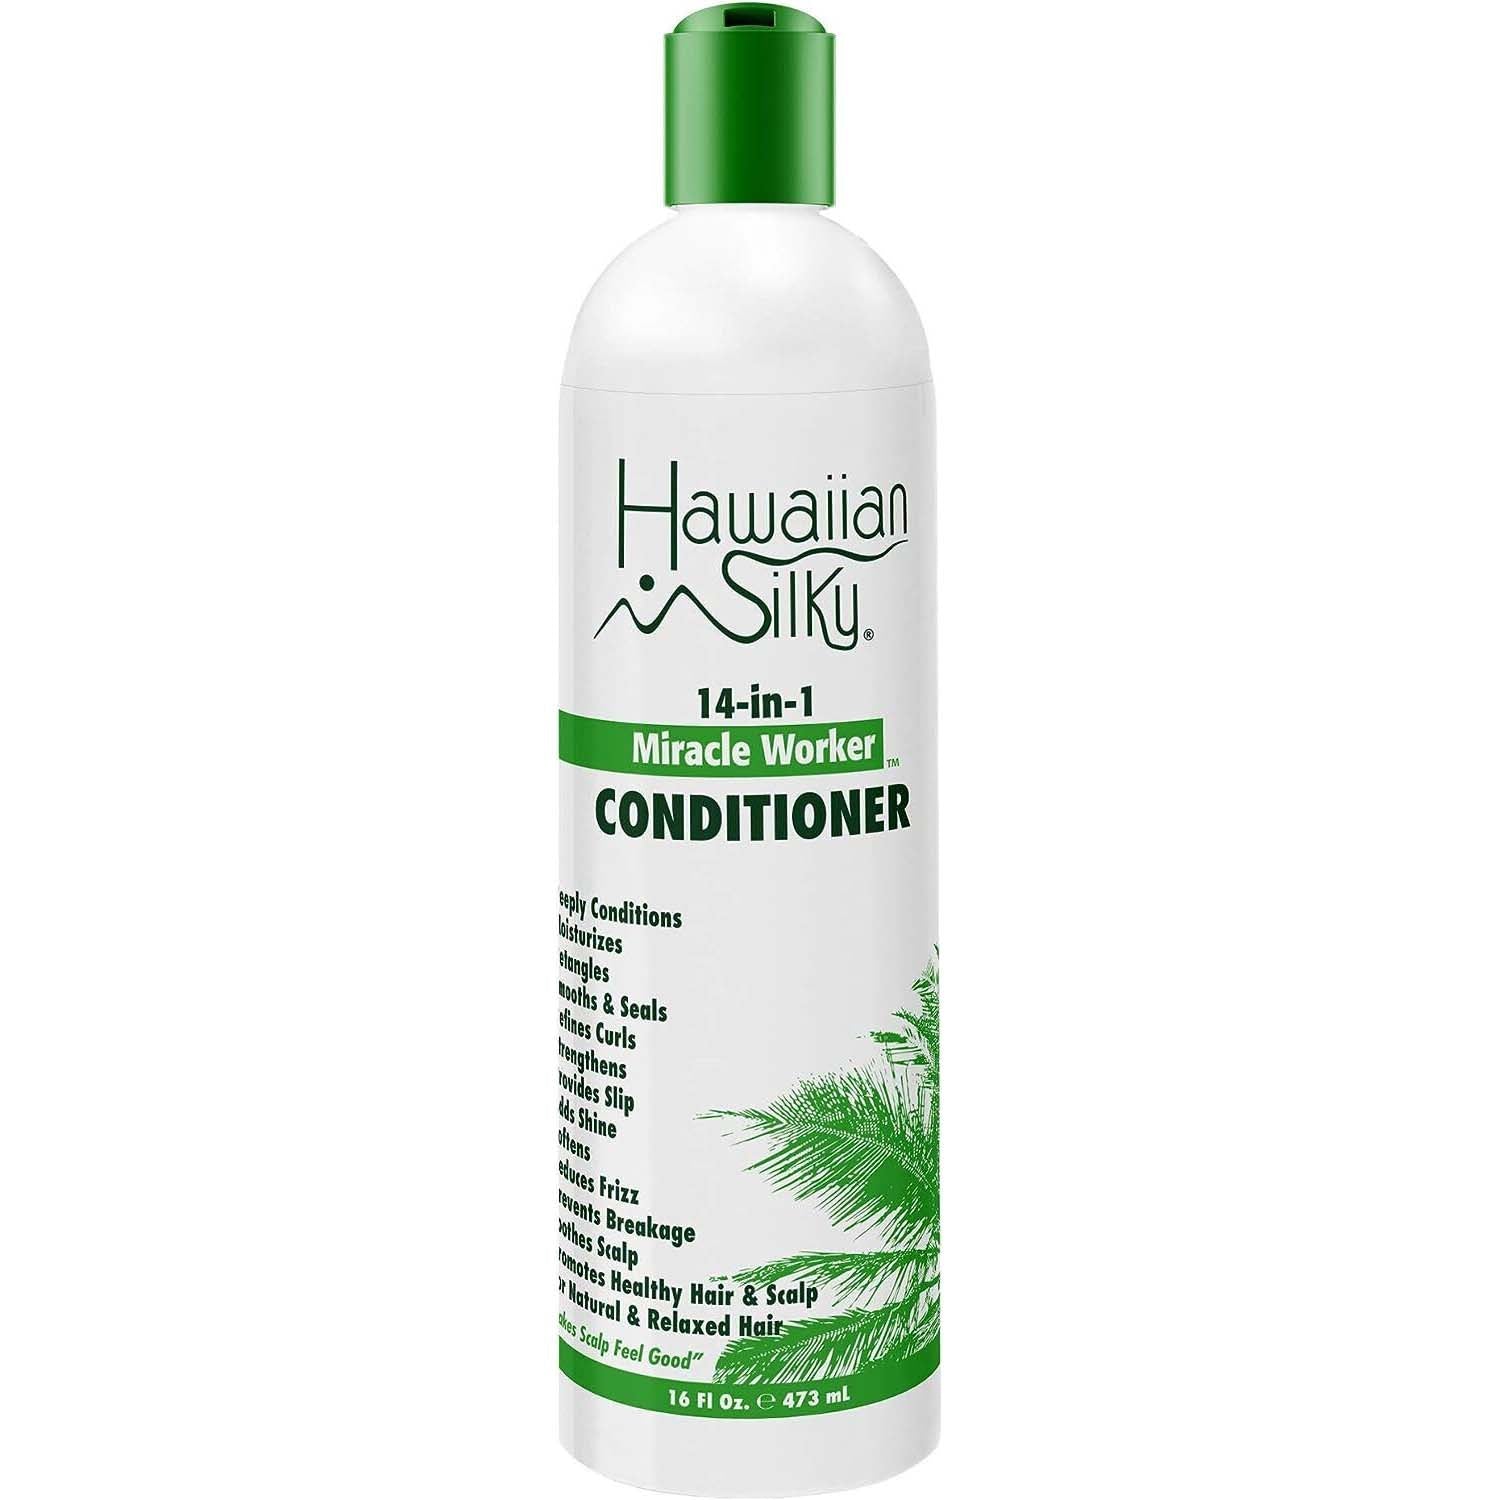 HAWAIIAN SILKY 14-IN-1 MIRACLE WORKER CONDITIONER 16oz.